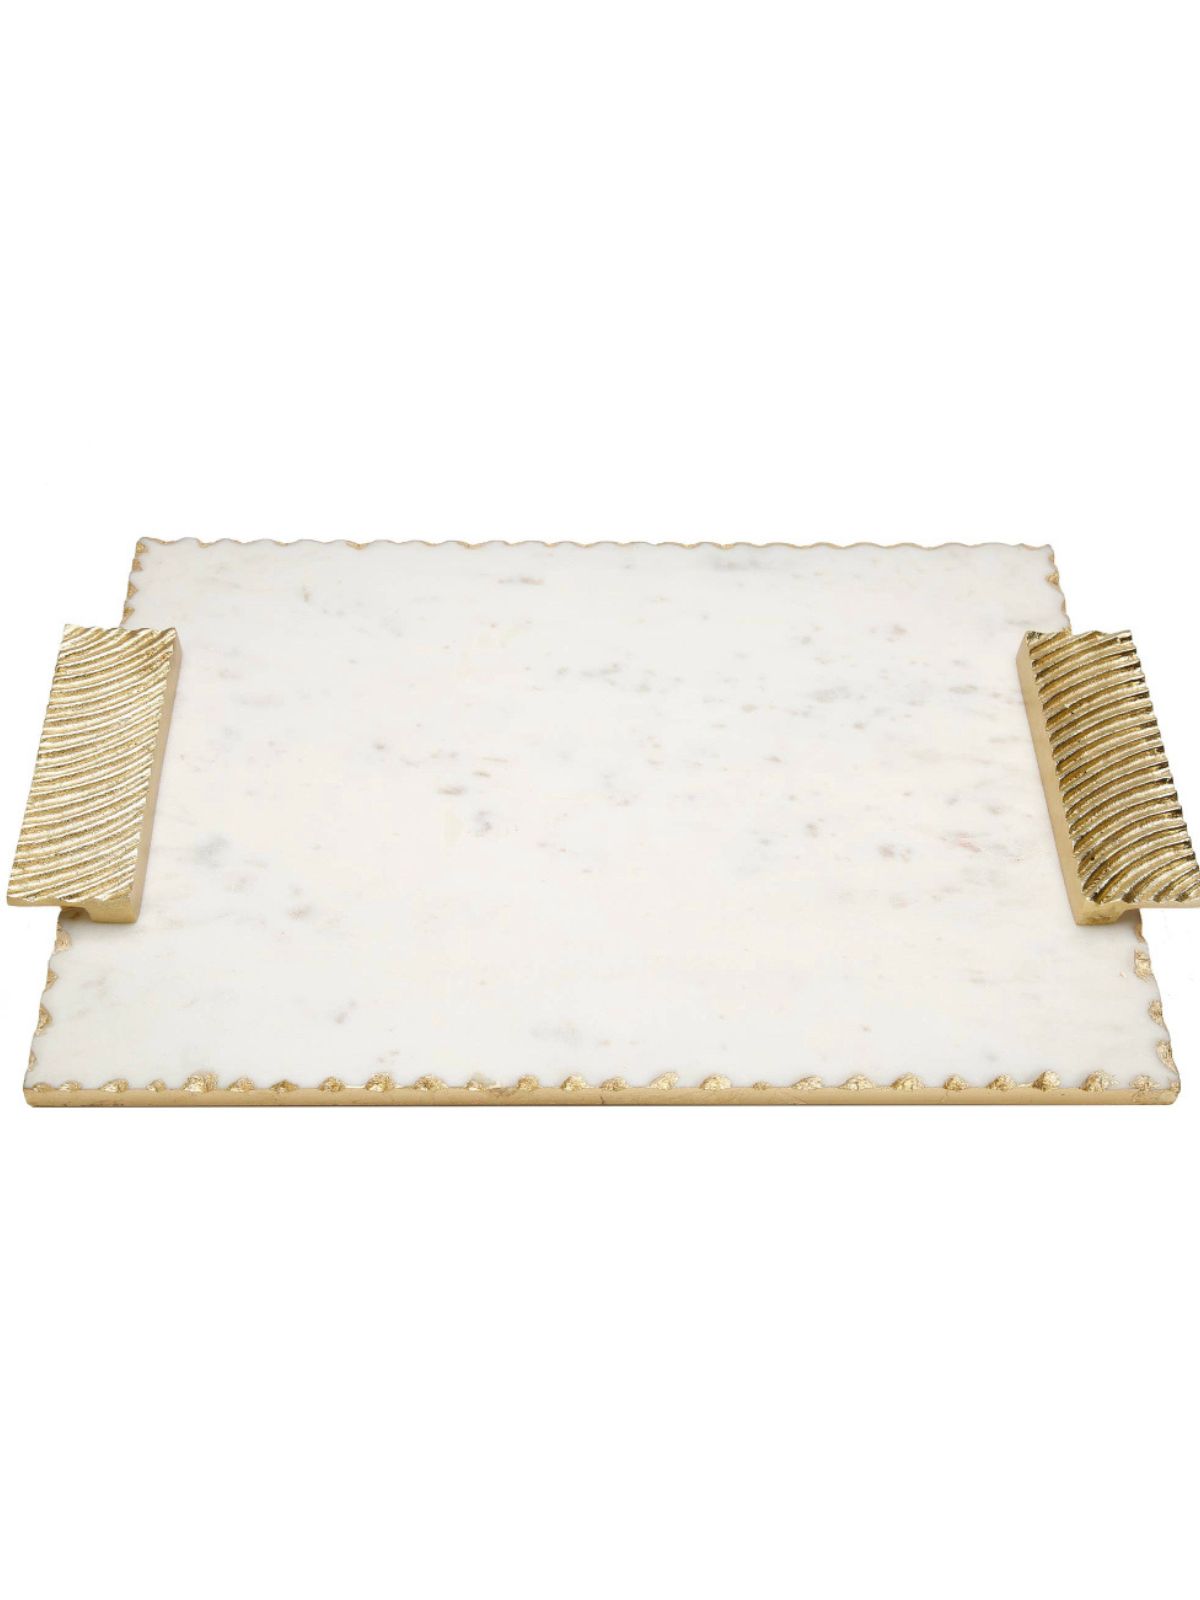 Luxurious White Marble Decorative Tray with Gold Brass Handles Sold by KYA Home Decor.